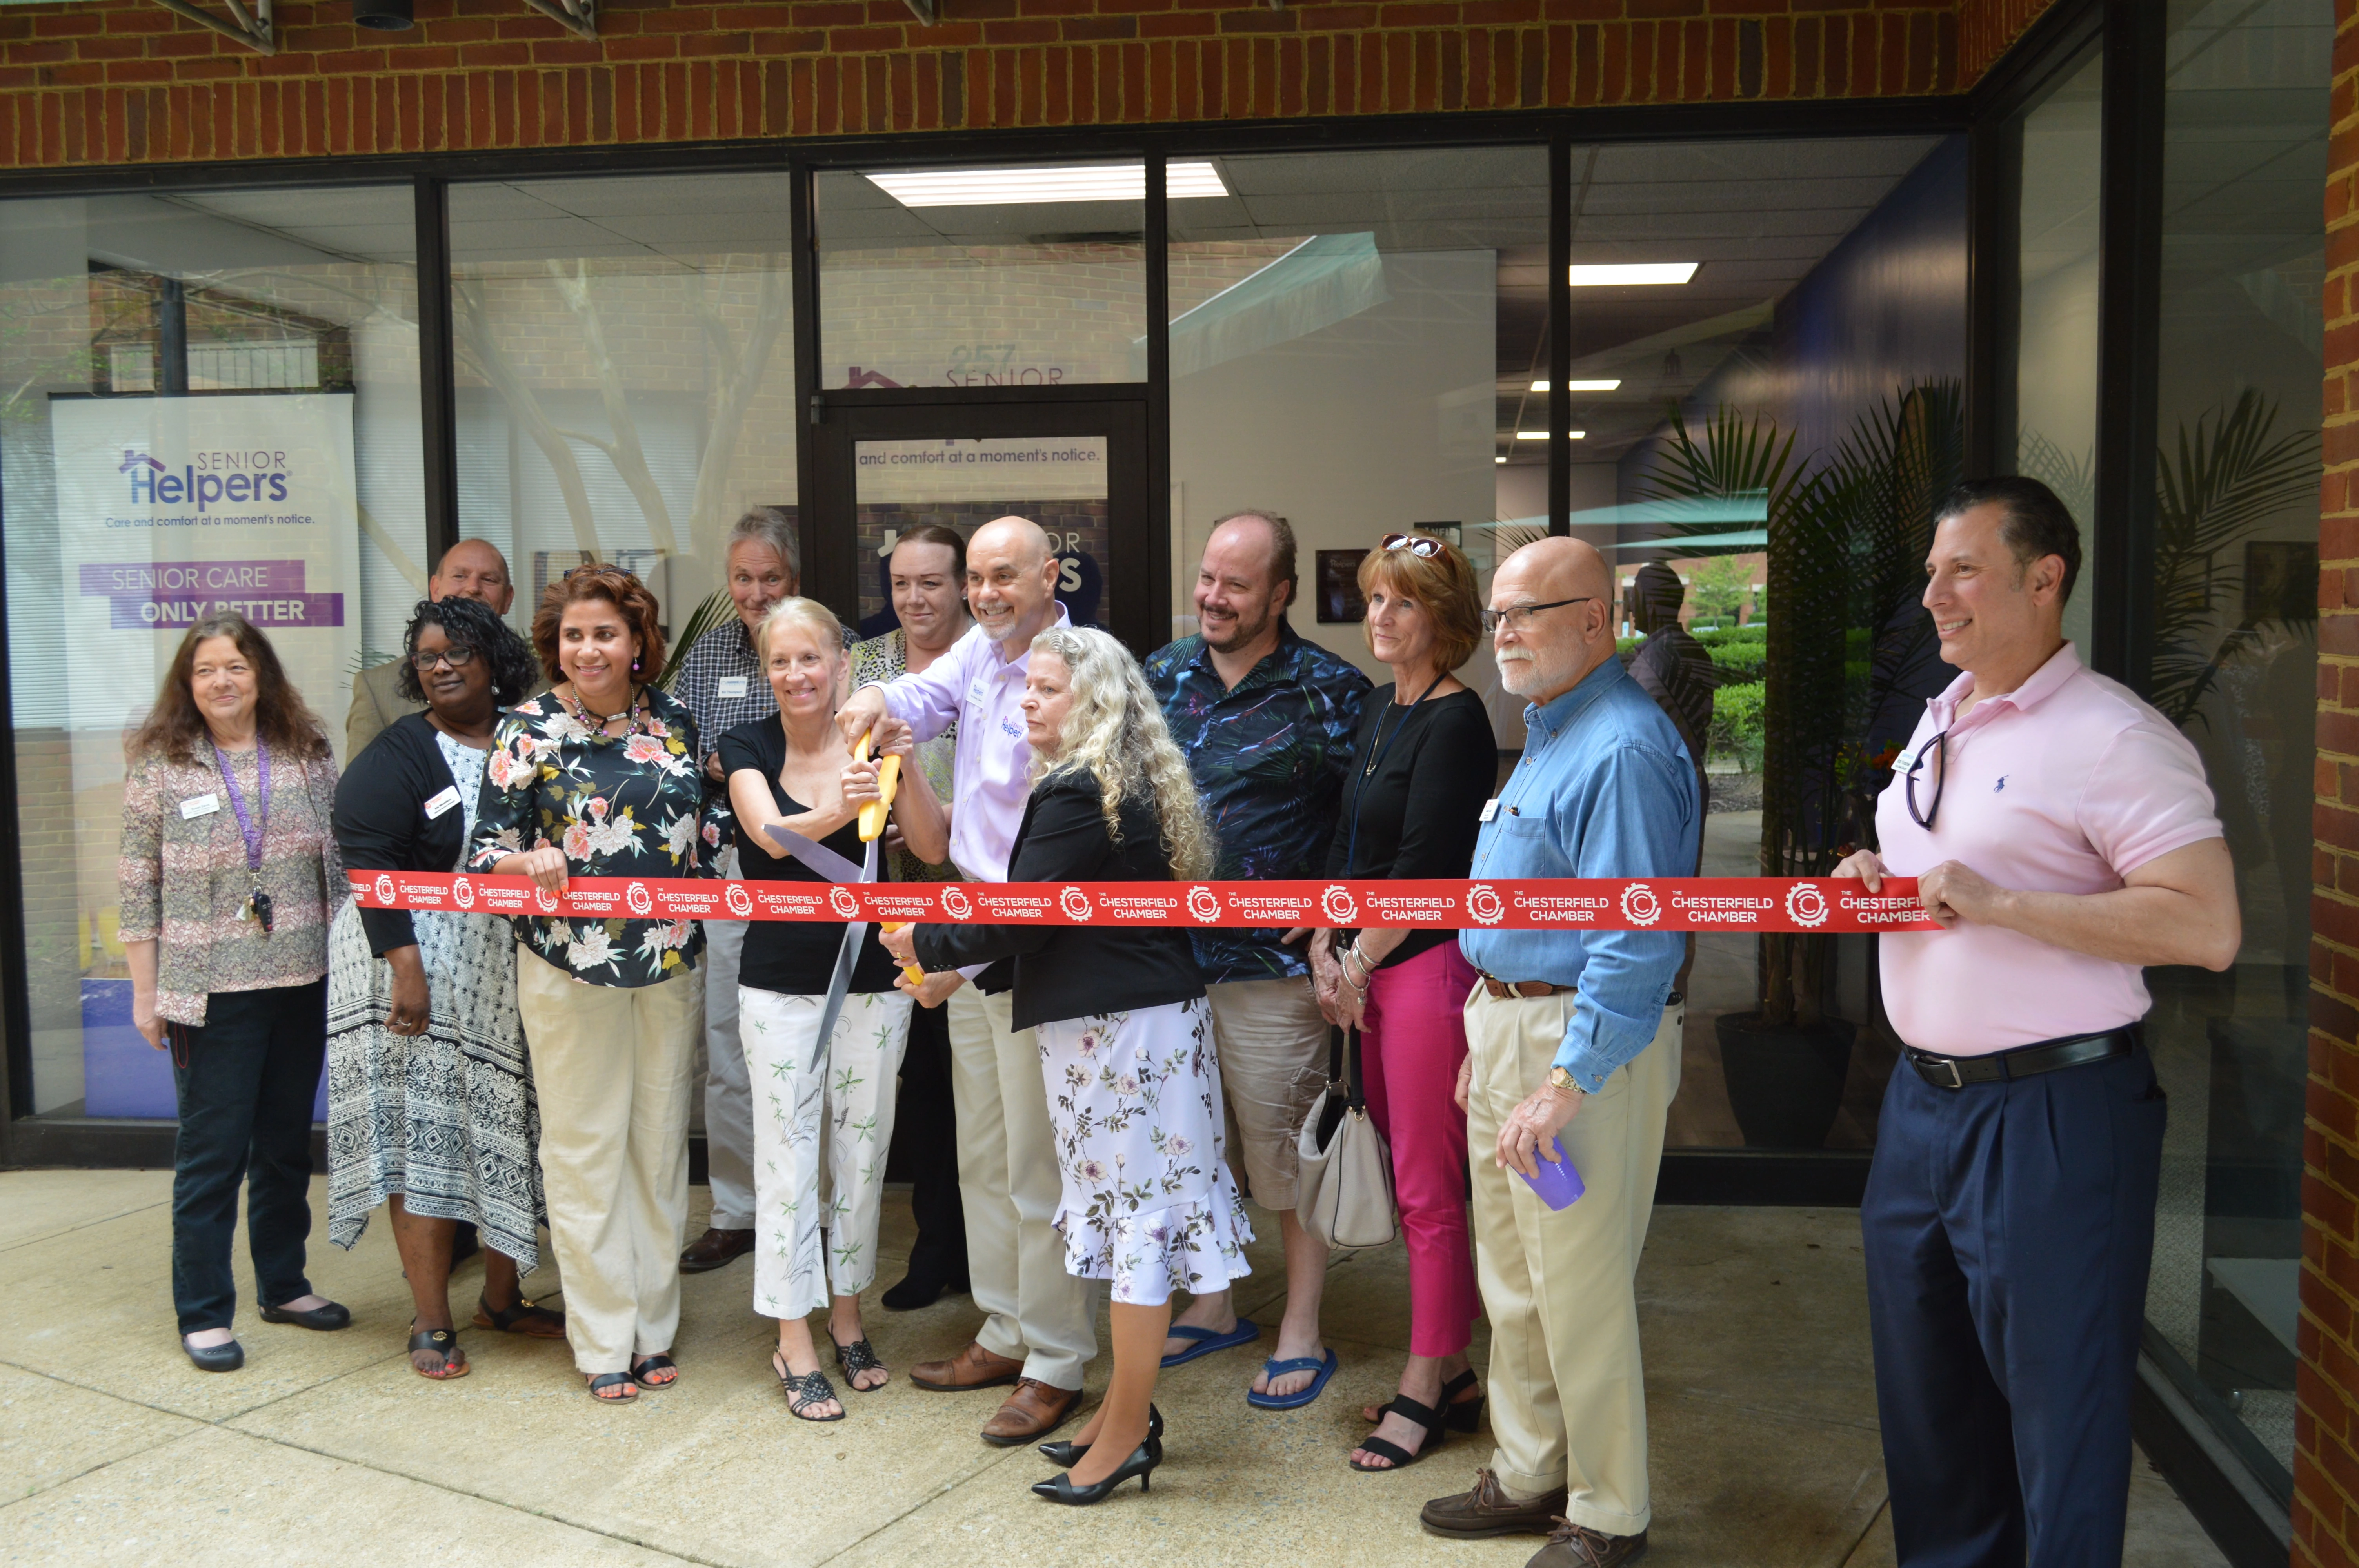 Thank you to our team and the Chesterfield Chamber of Commerce for supporting our Ribbon Cutting Ceremony!